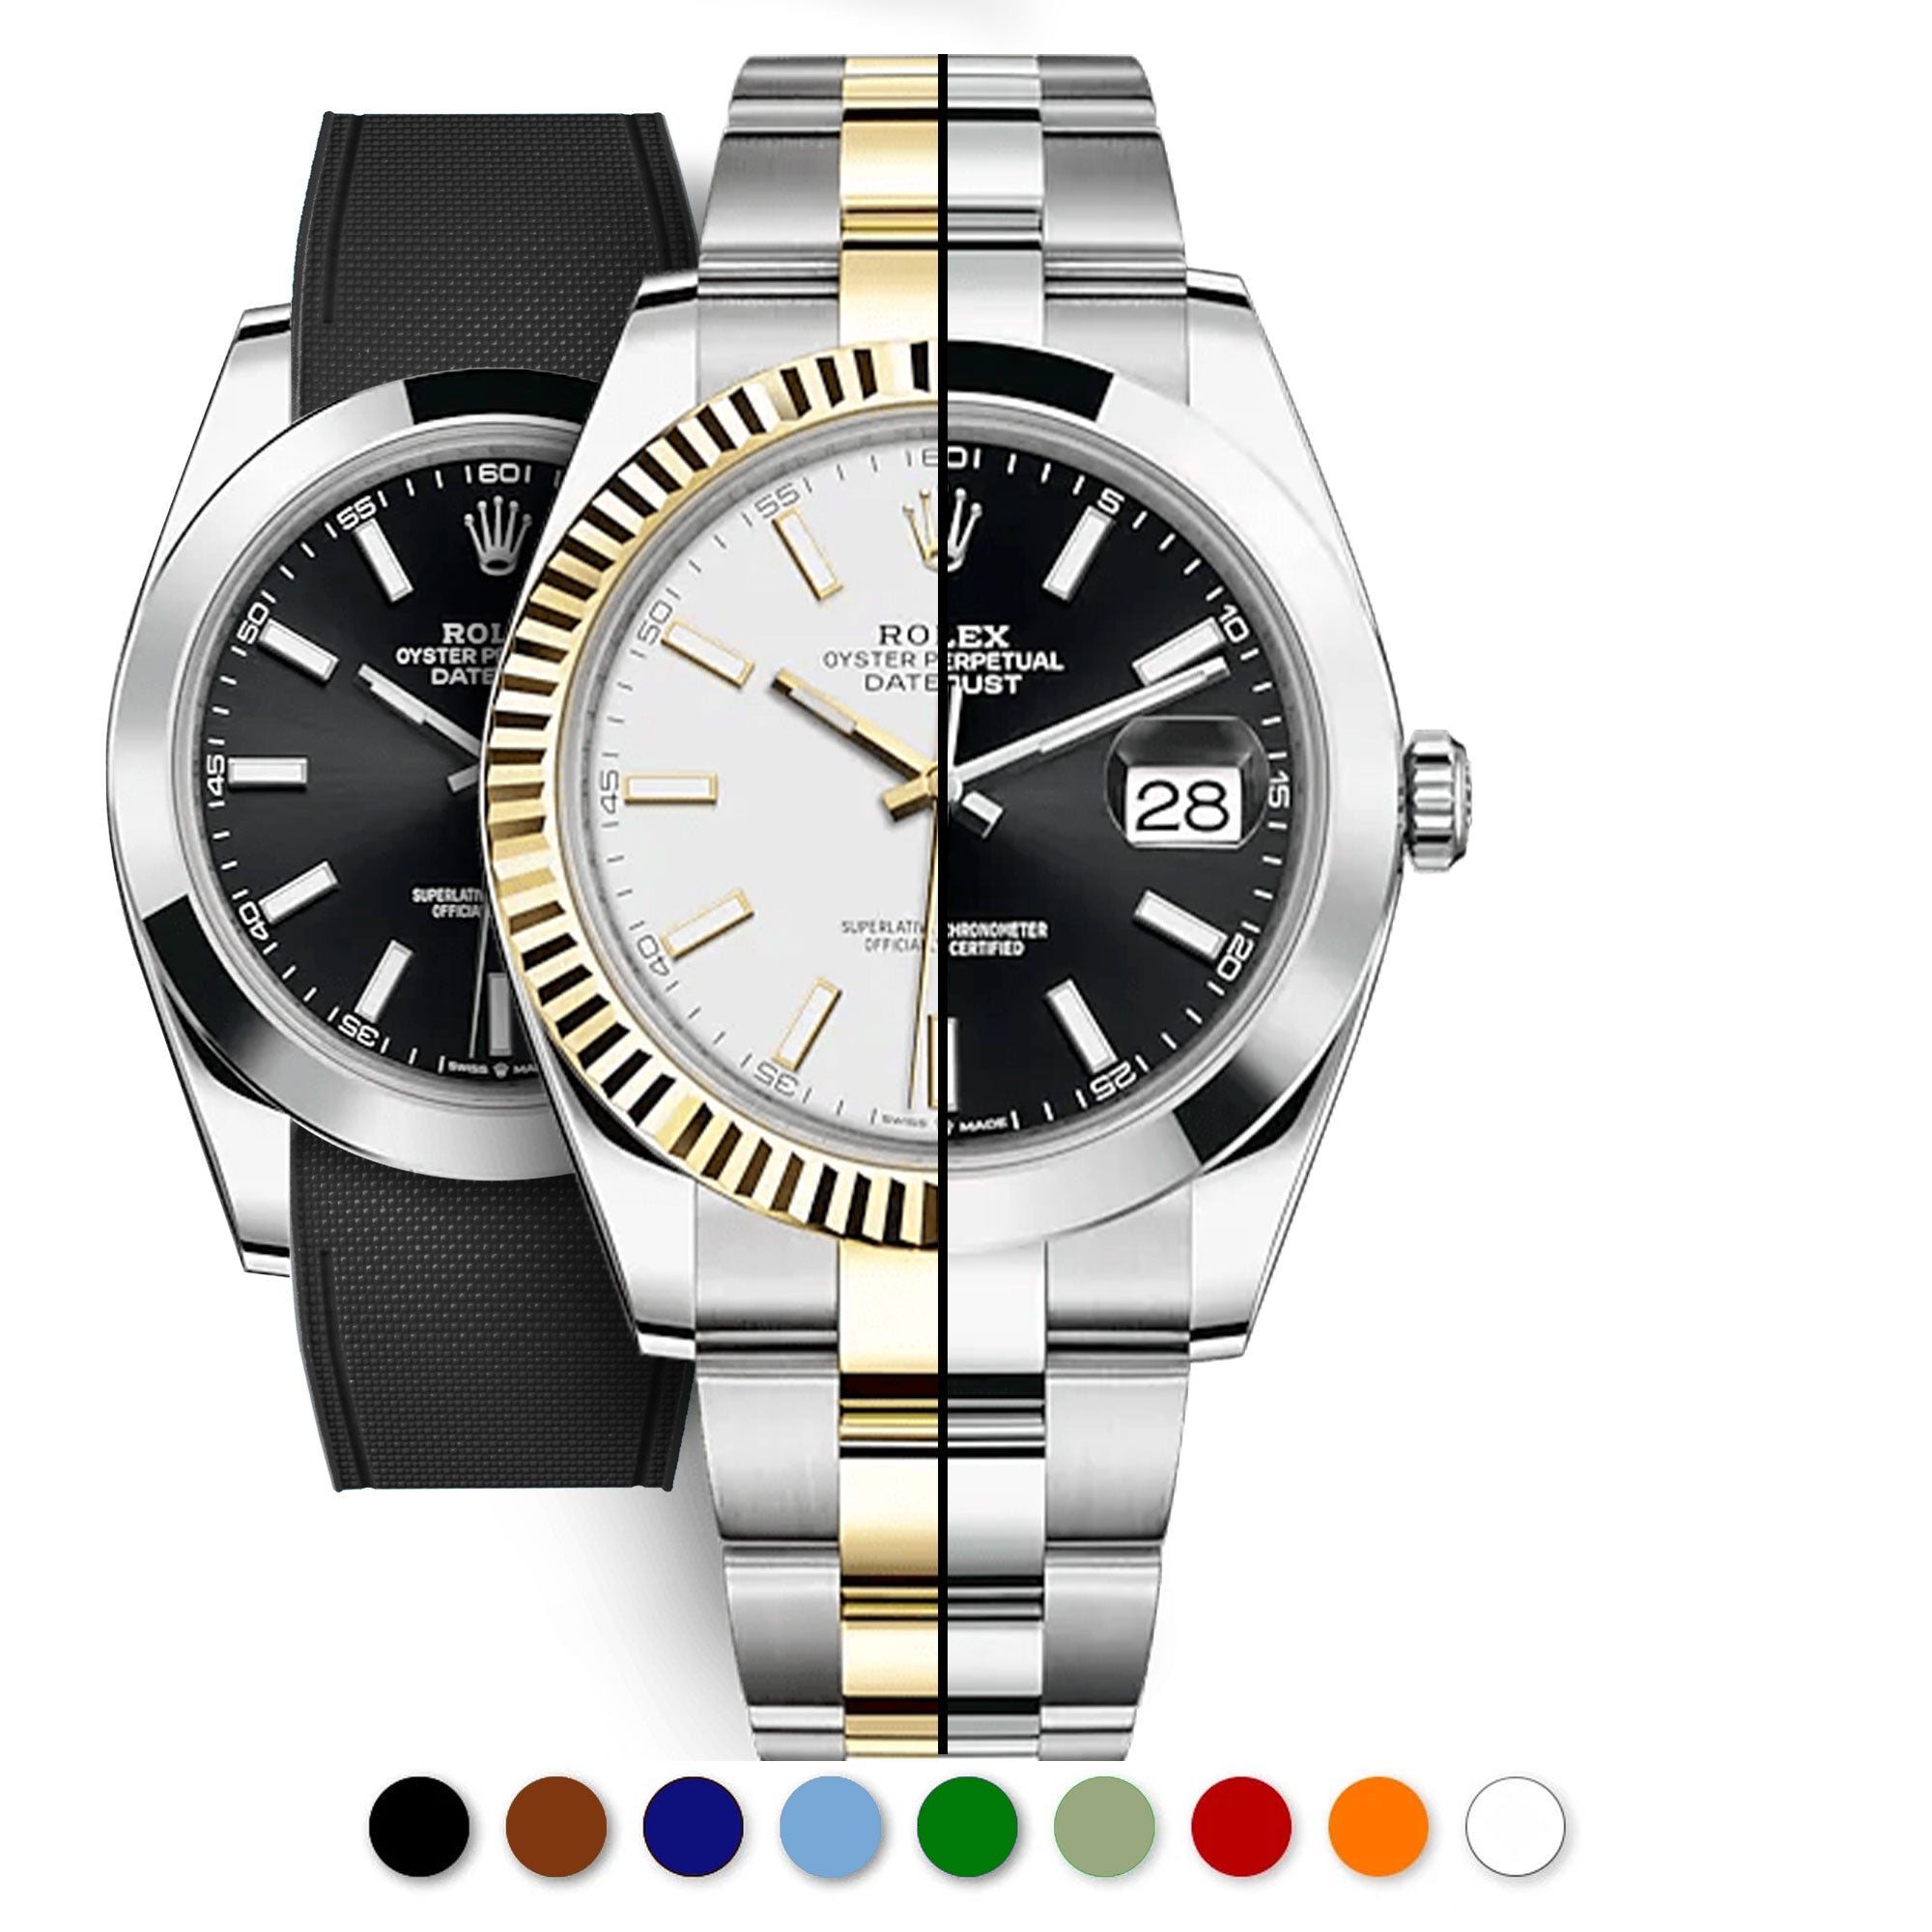 Rolex Datejust 41 - Oystersteel & White Gold - Black Dial